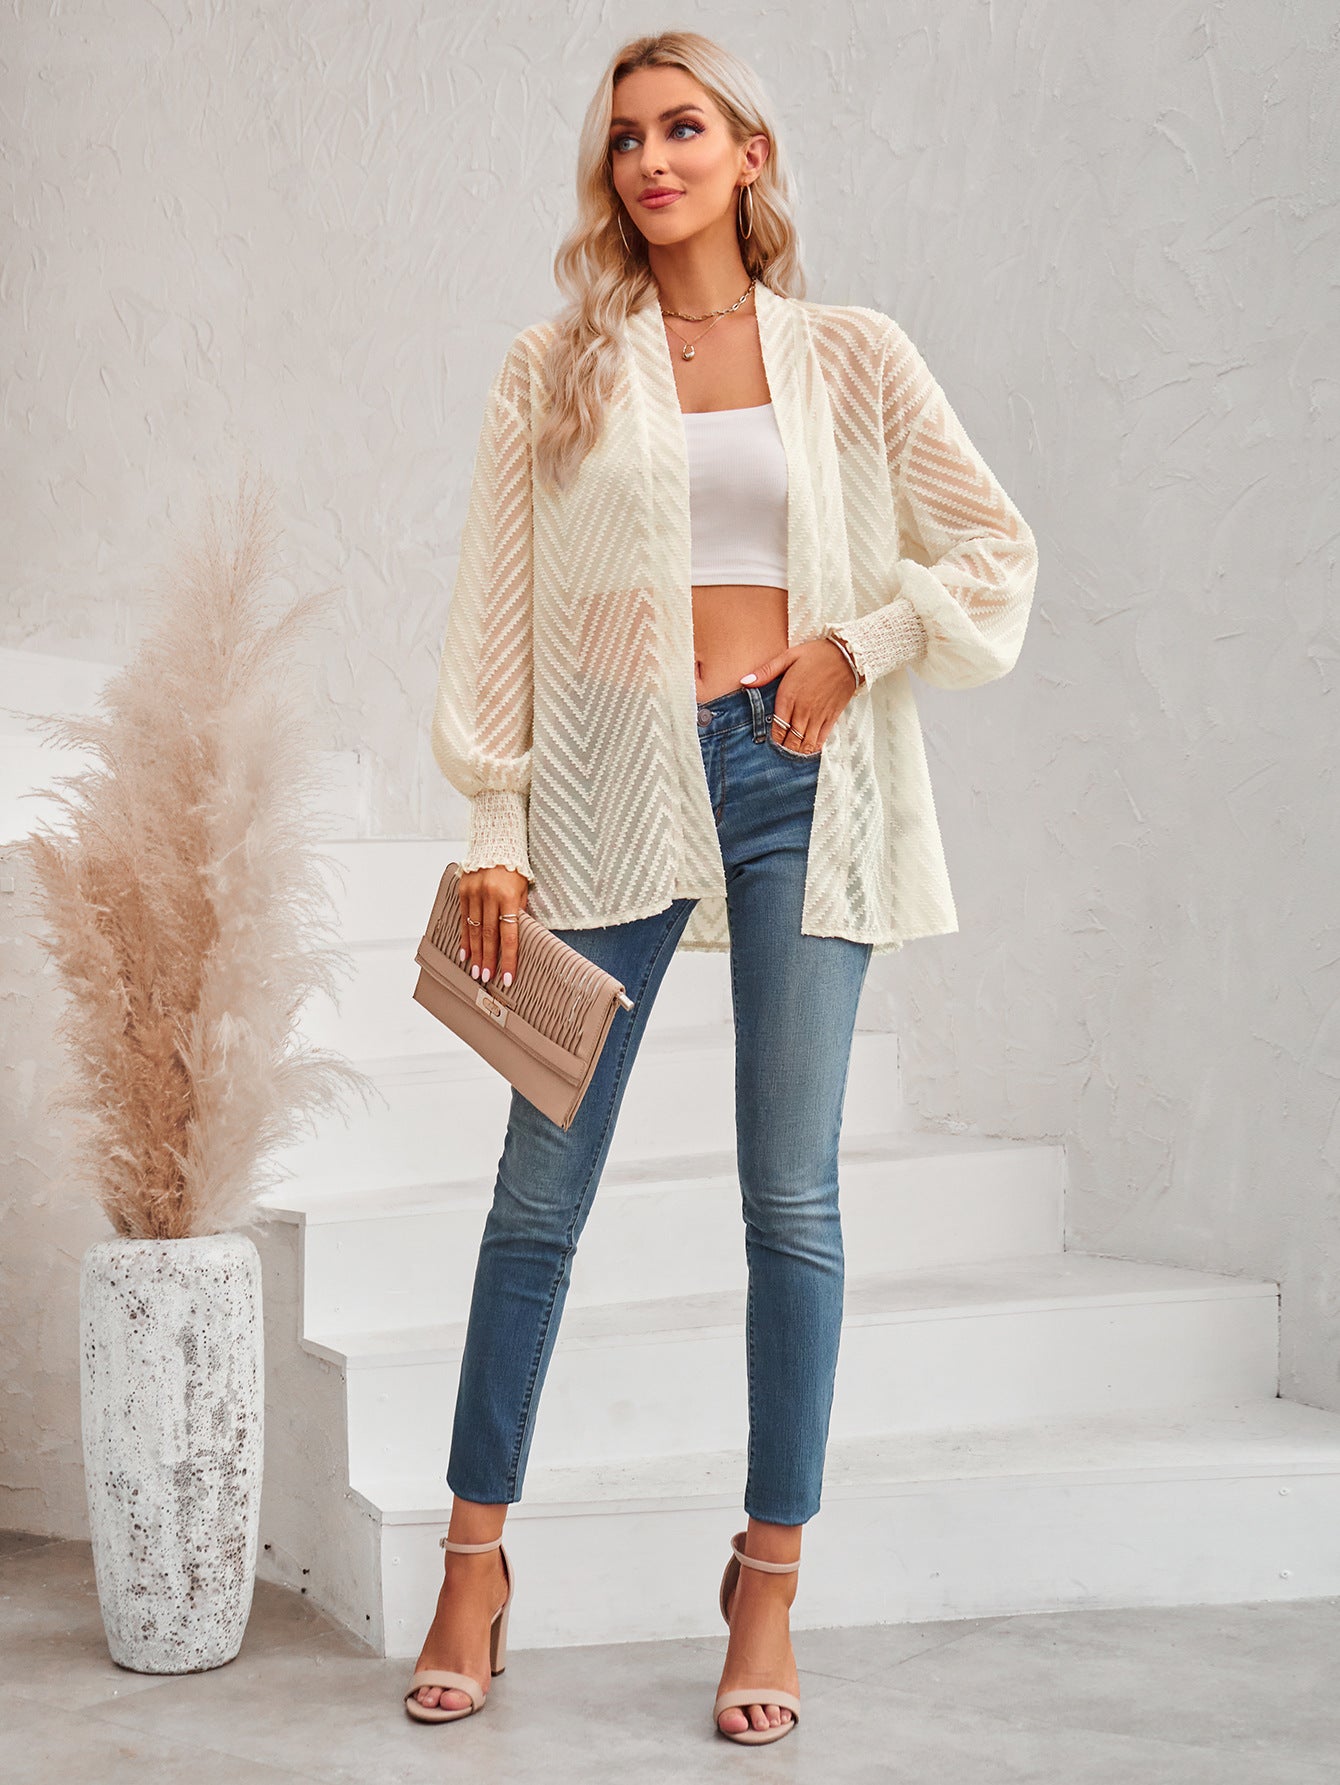 Women Casual Solid Color Loose Smocking Jacquard Cardigan Top